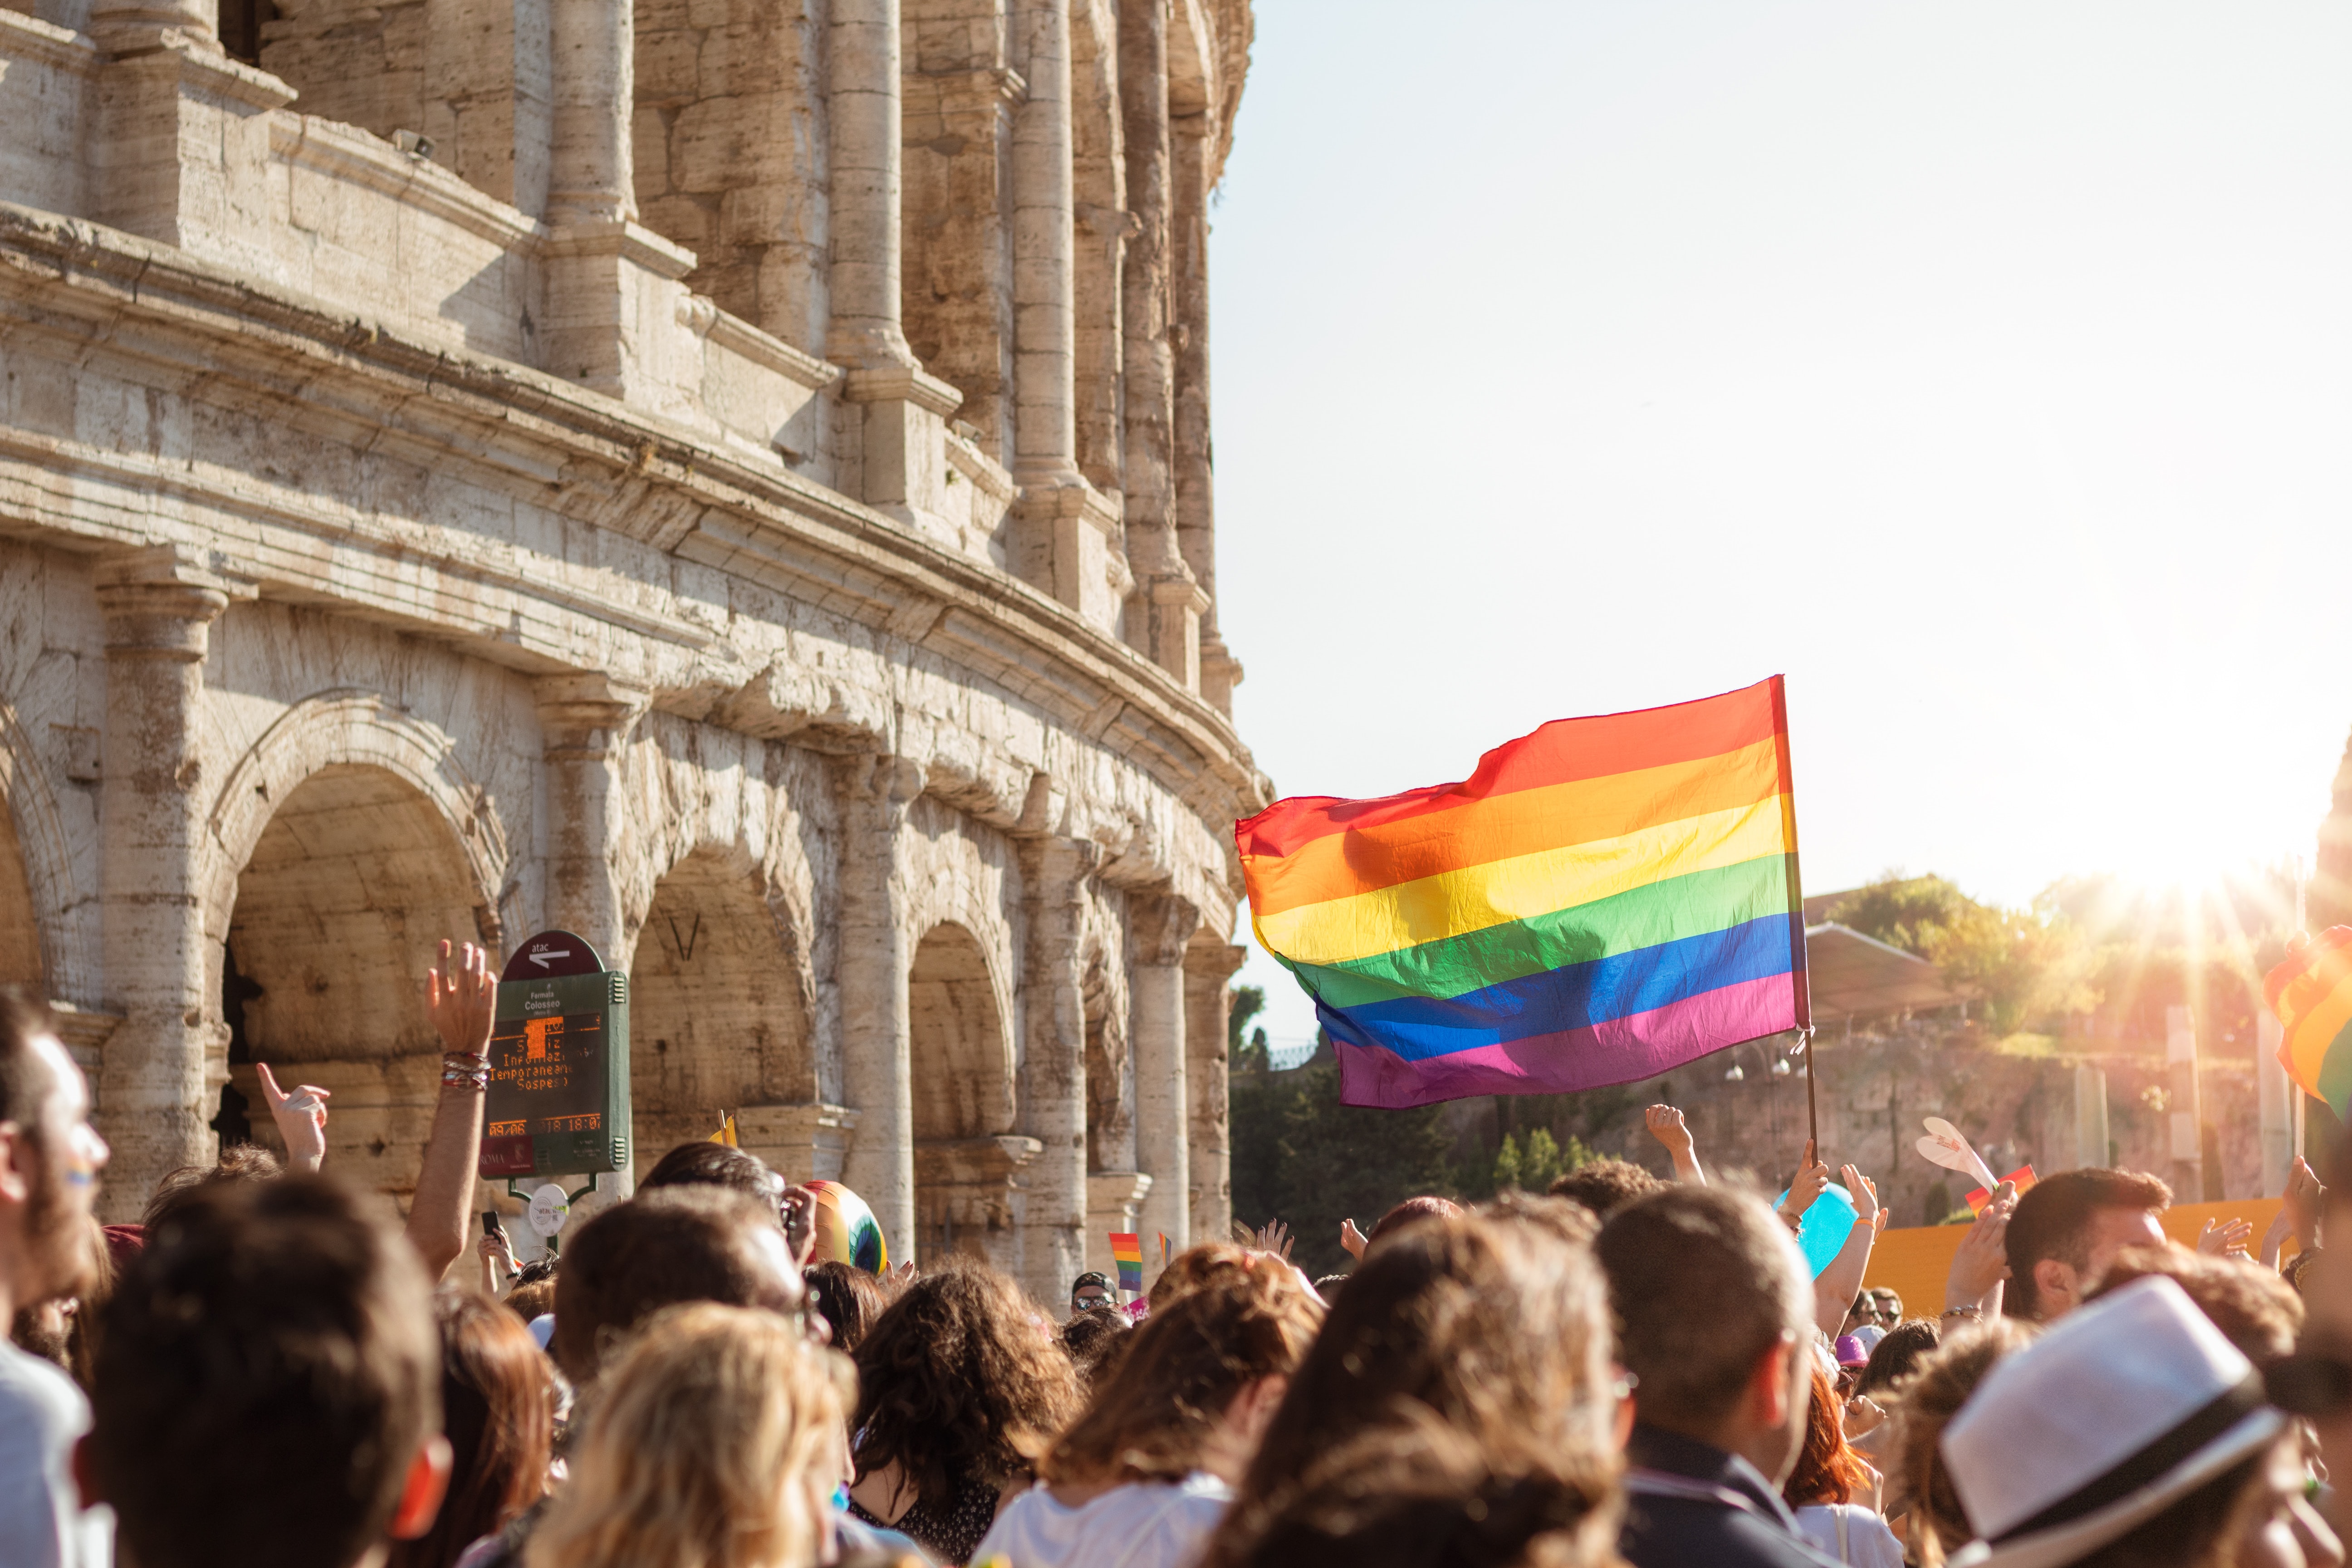 Rainbow flag raised amongst a crowd next to Colesseum in Rome.